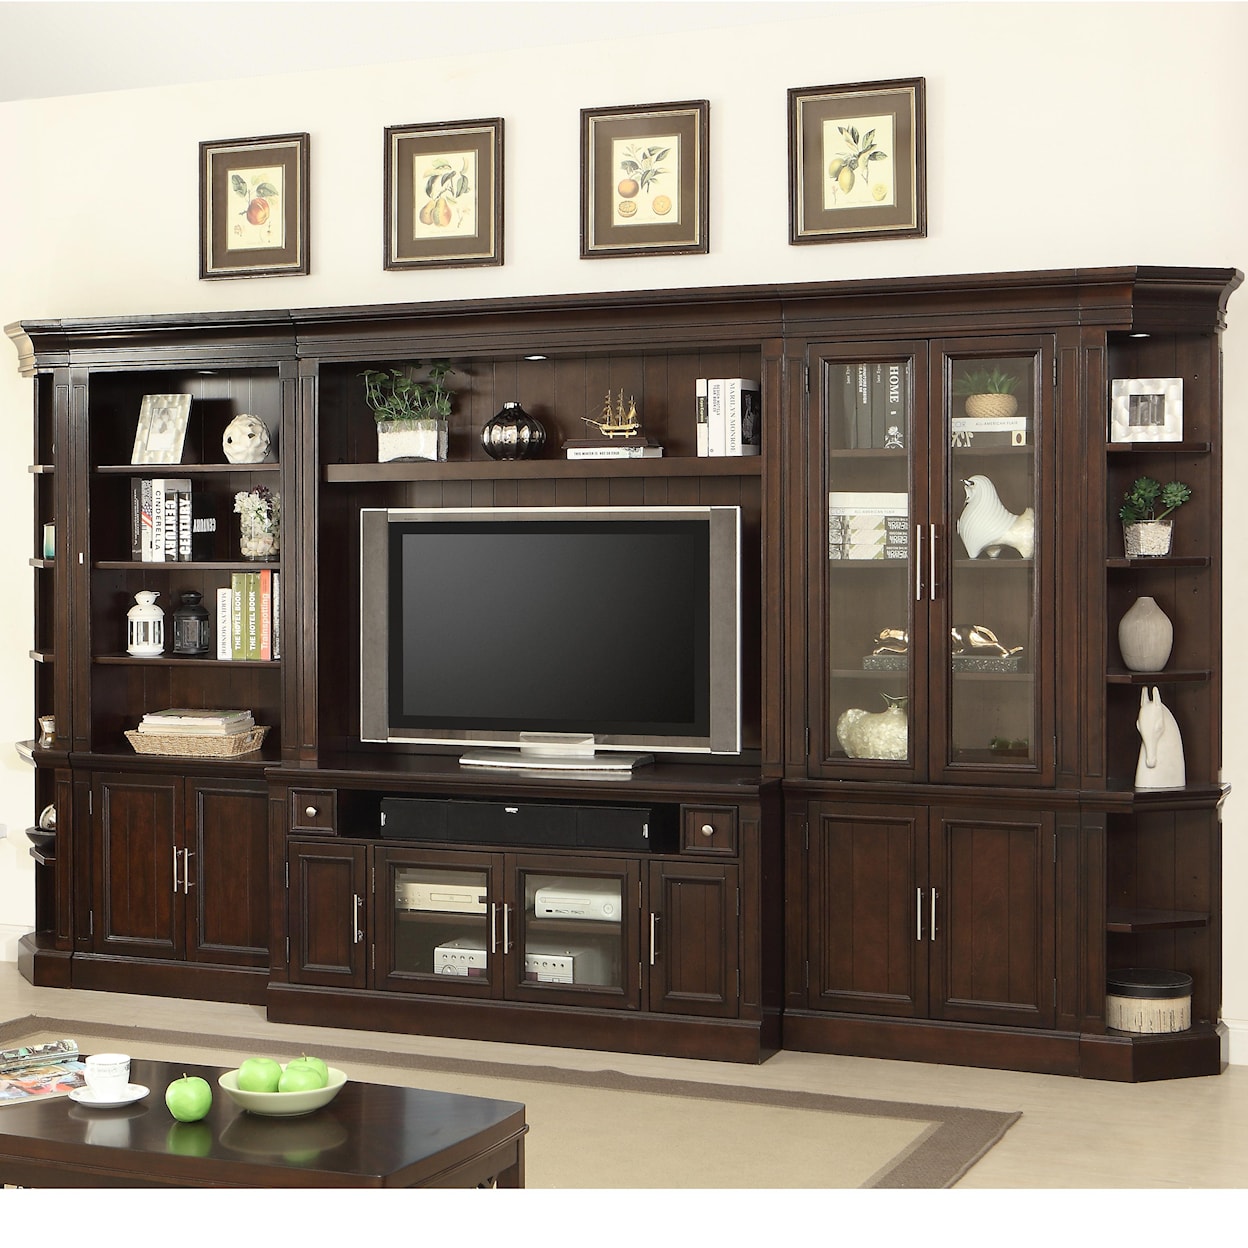 Parker House Stanford Wall Unit